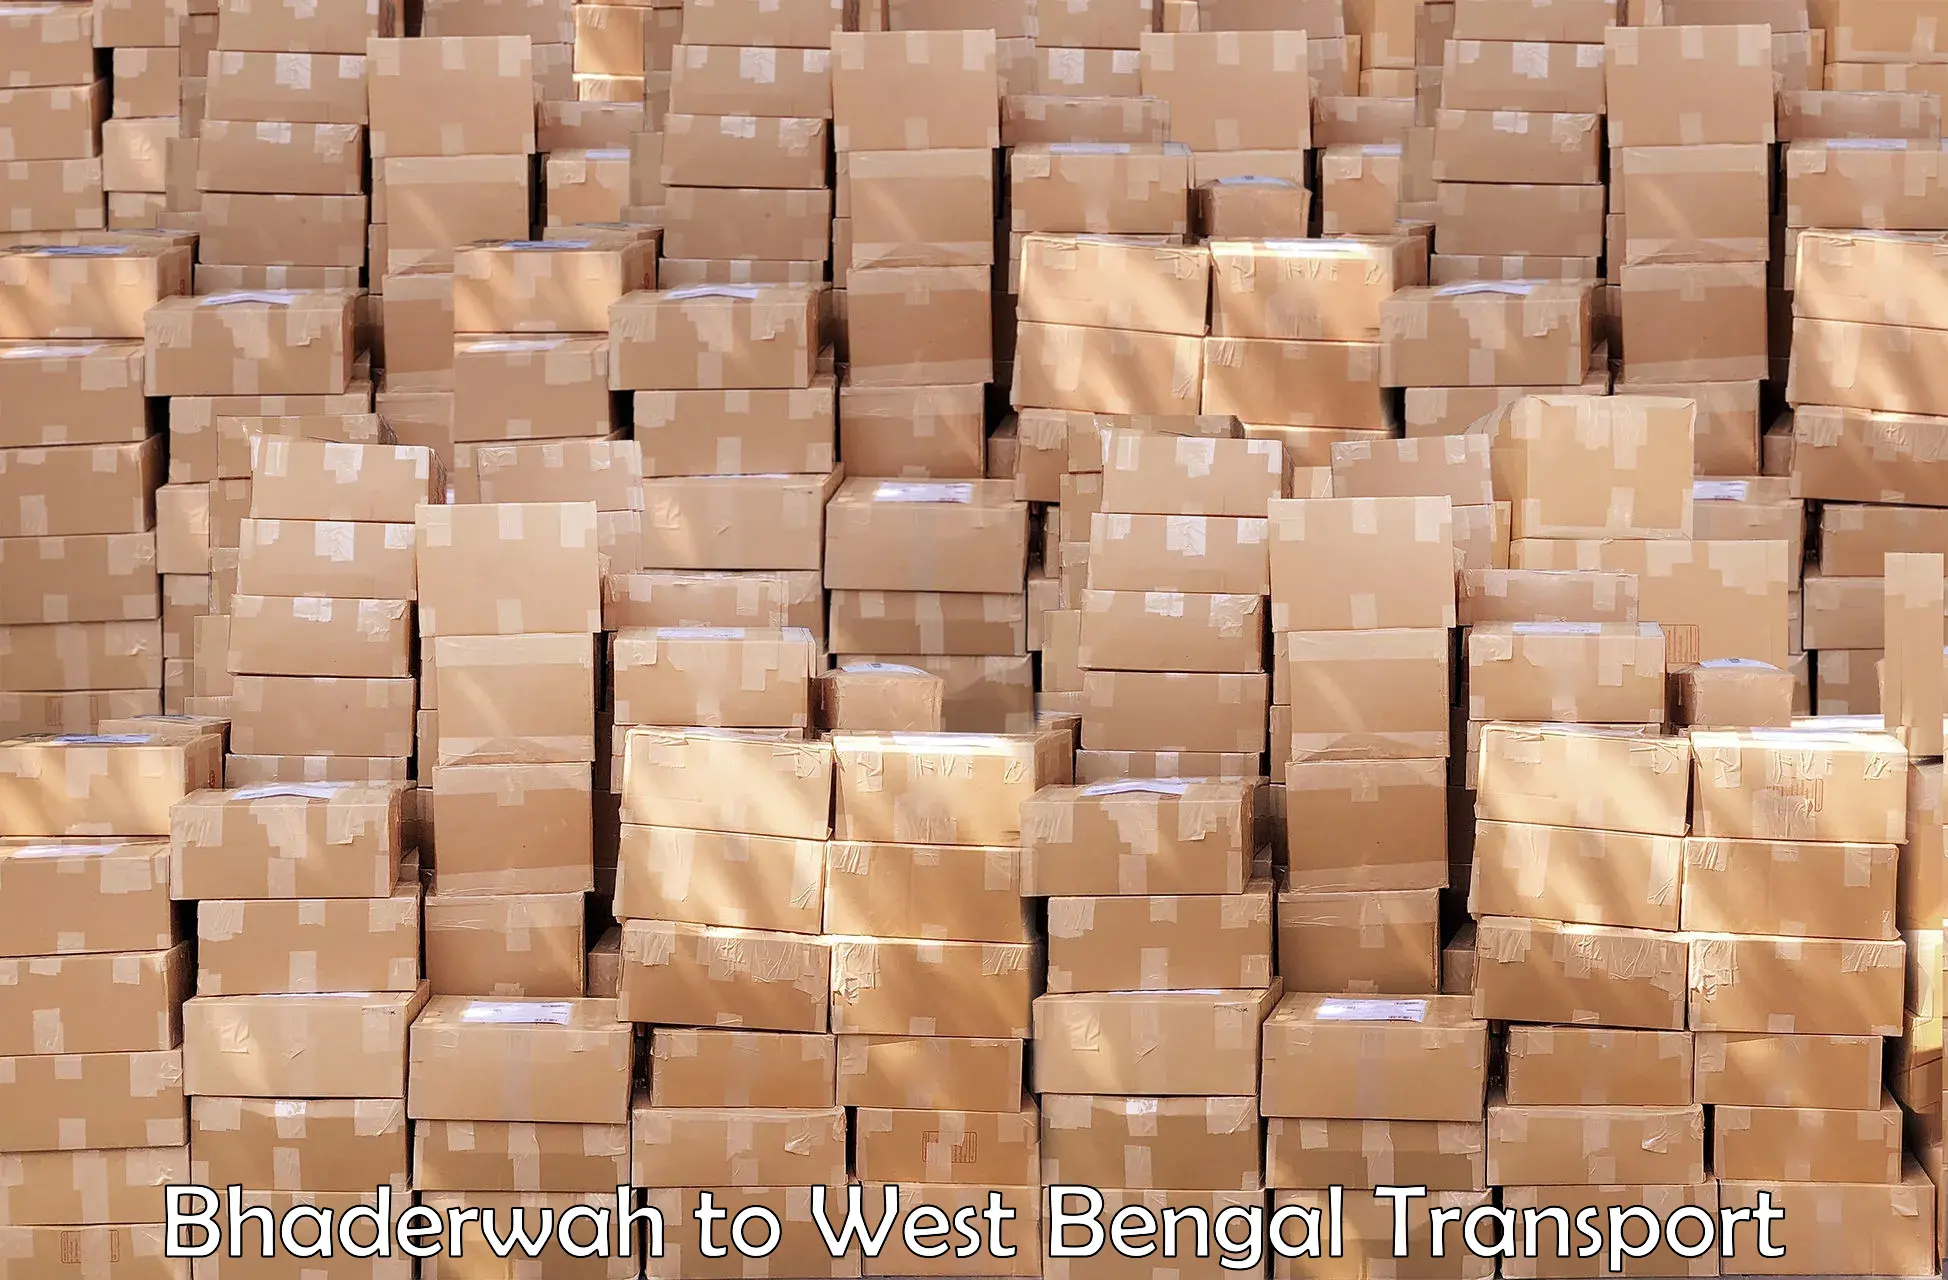 Daily parcel service transport in Bhaderwah to West Bengal